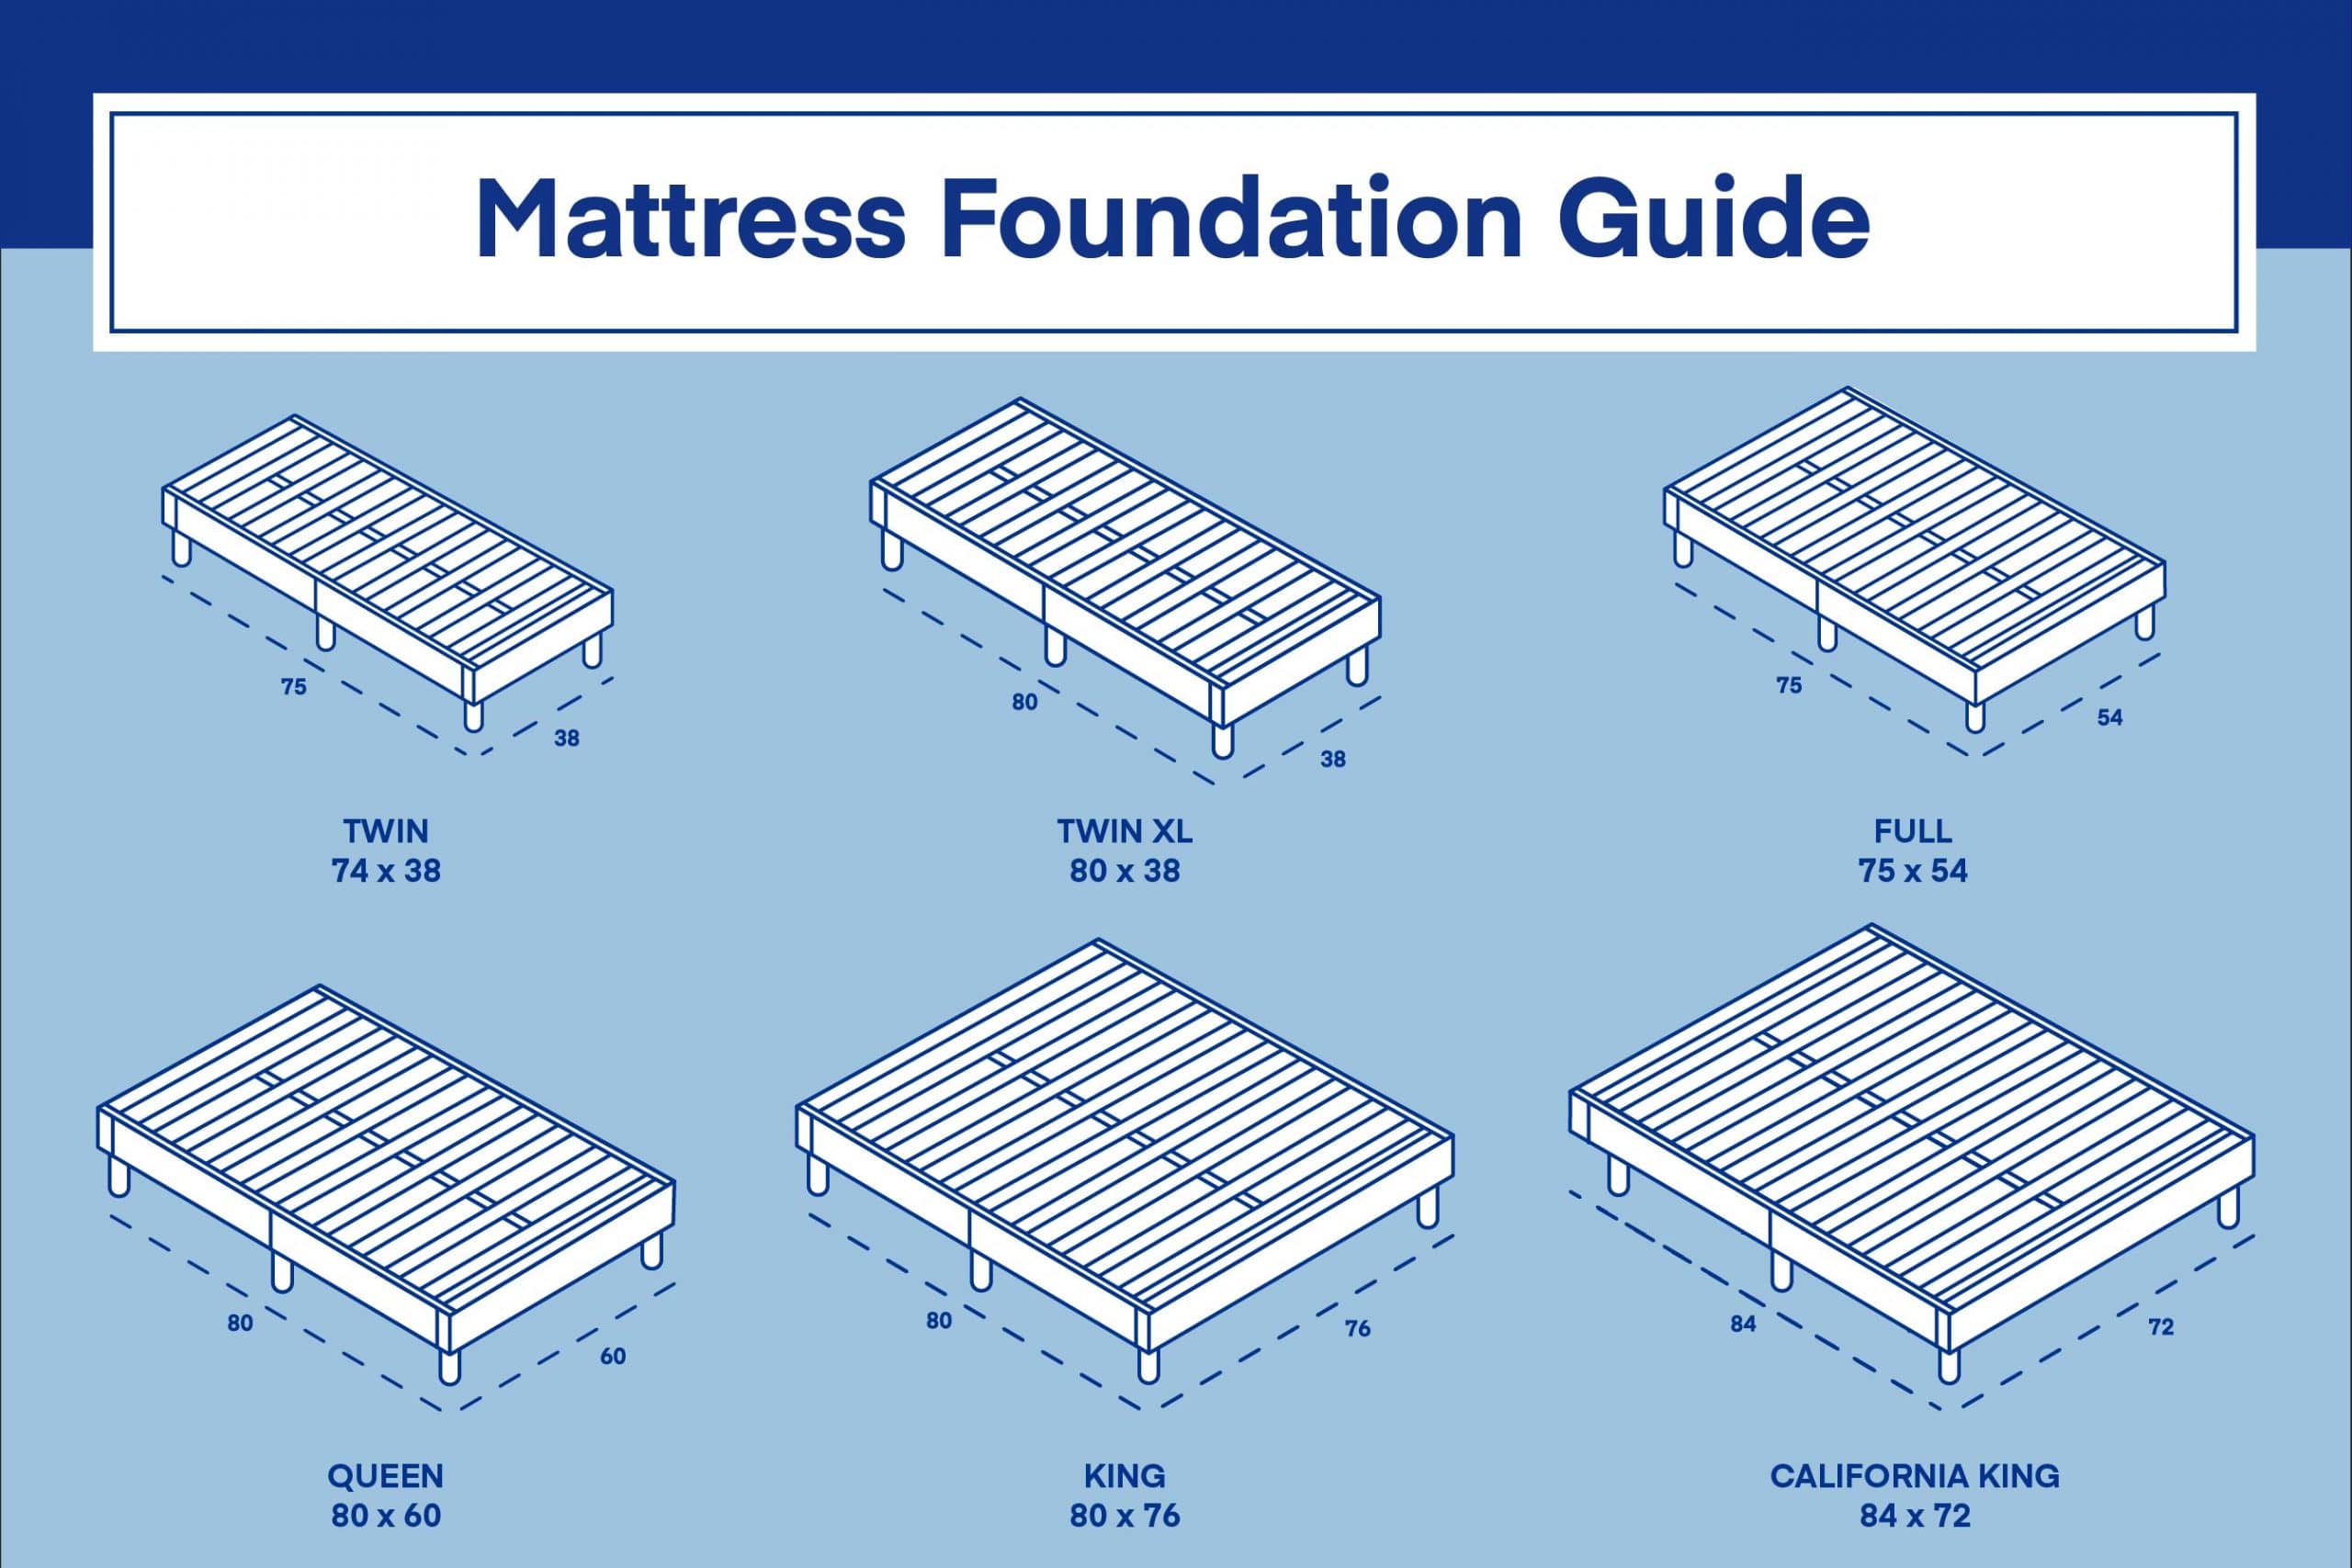 The Different Types Of Mattresses And Heights